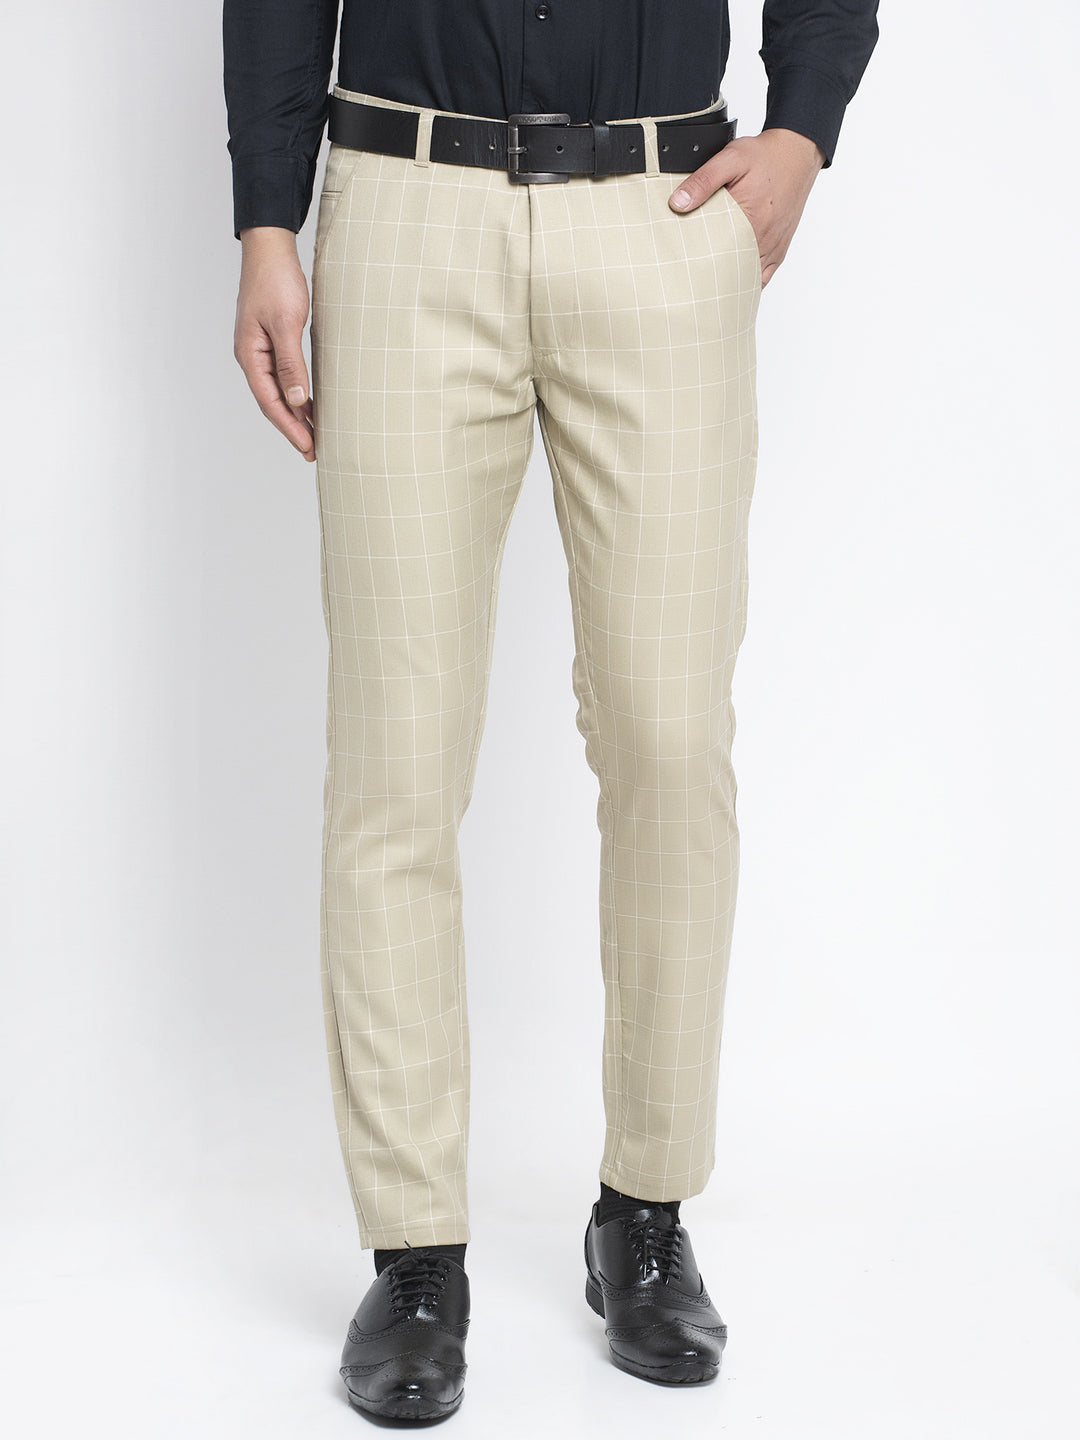 Style Hook Polyster Blend Formal Trousers For Man regular fit |formal pants  cream colour |